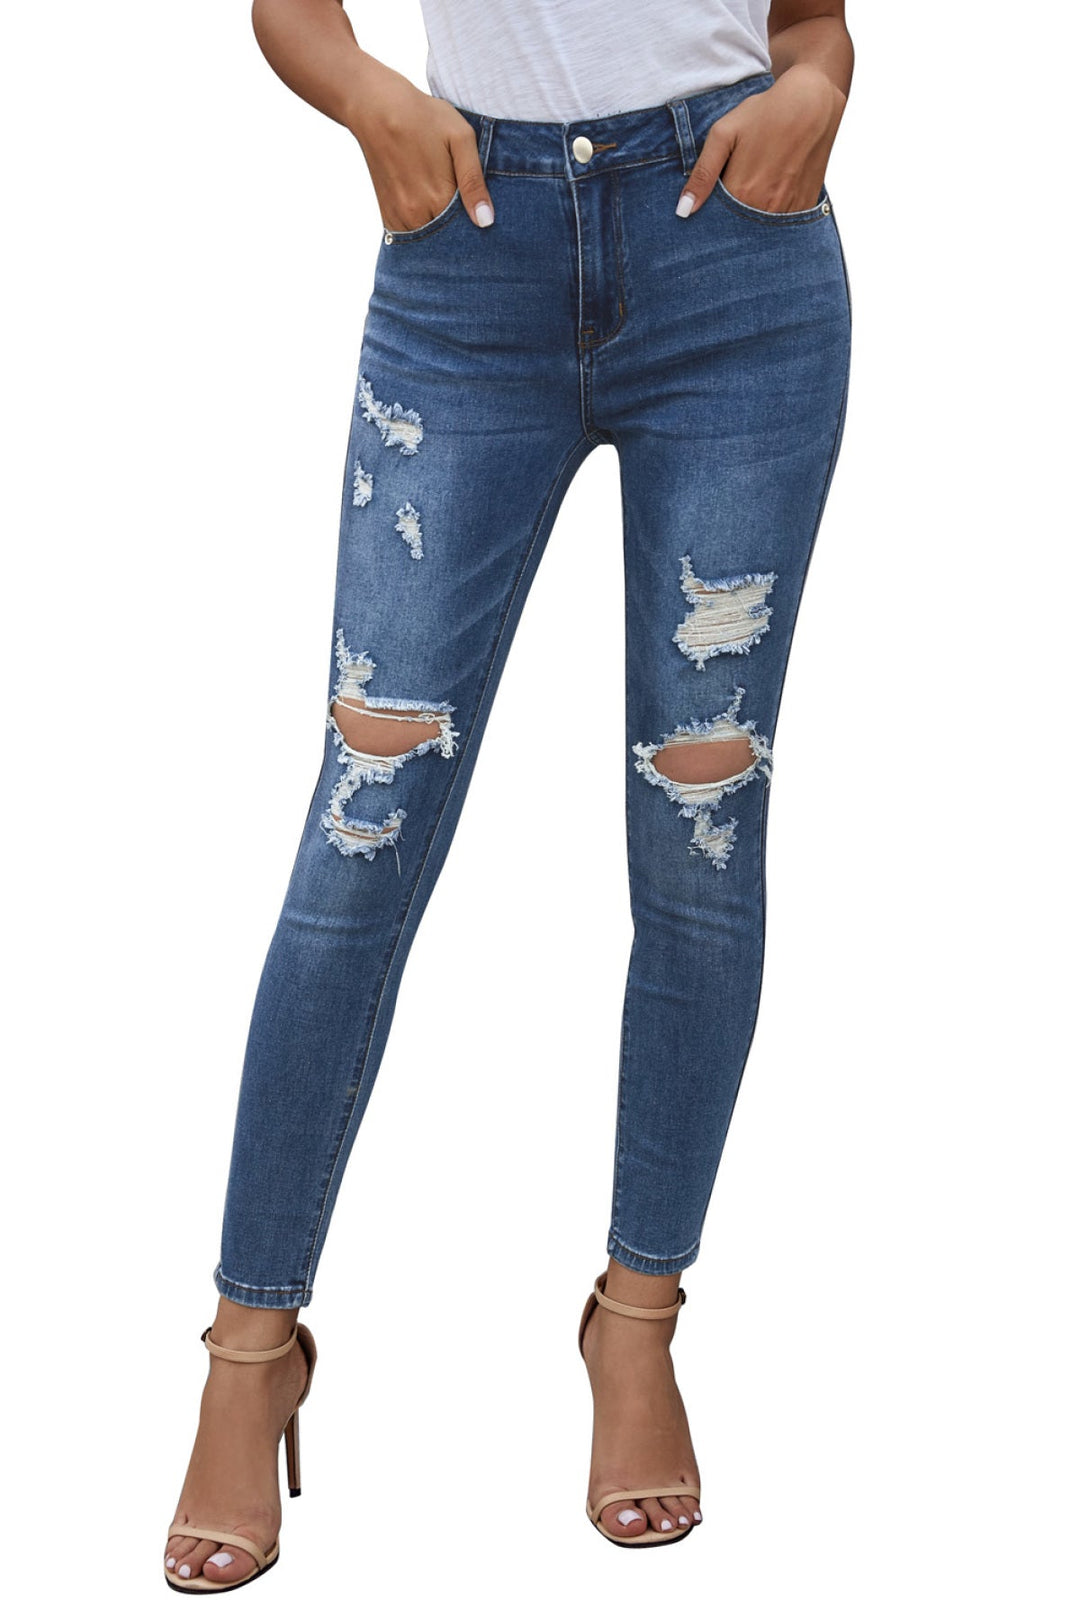 Blue Hollow Out Vintage Skinny Ripped Jeans